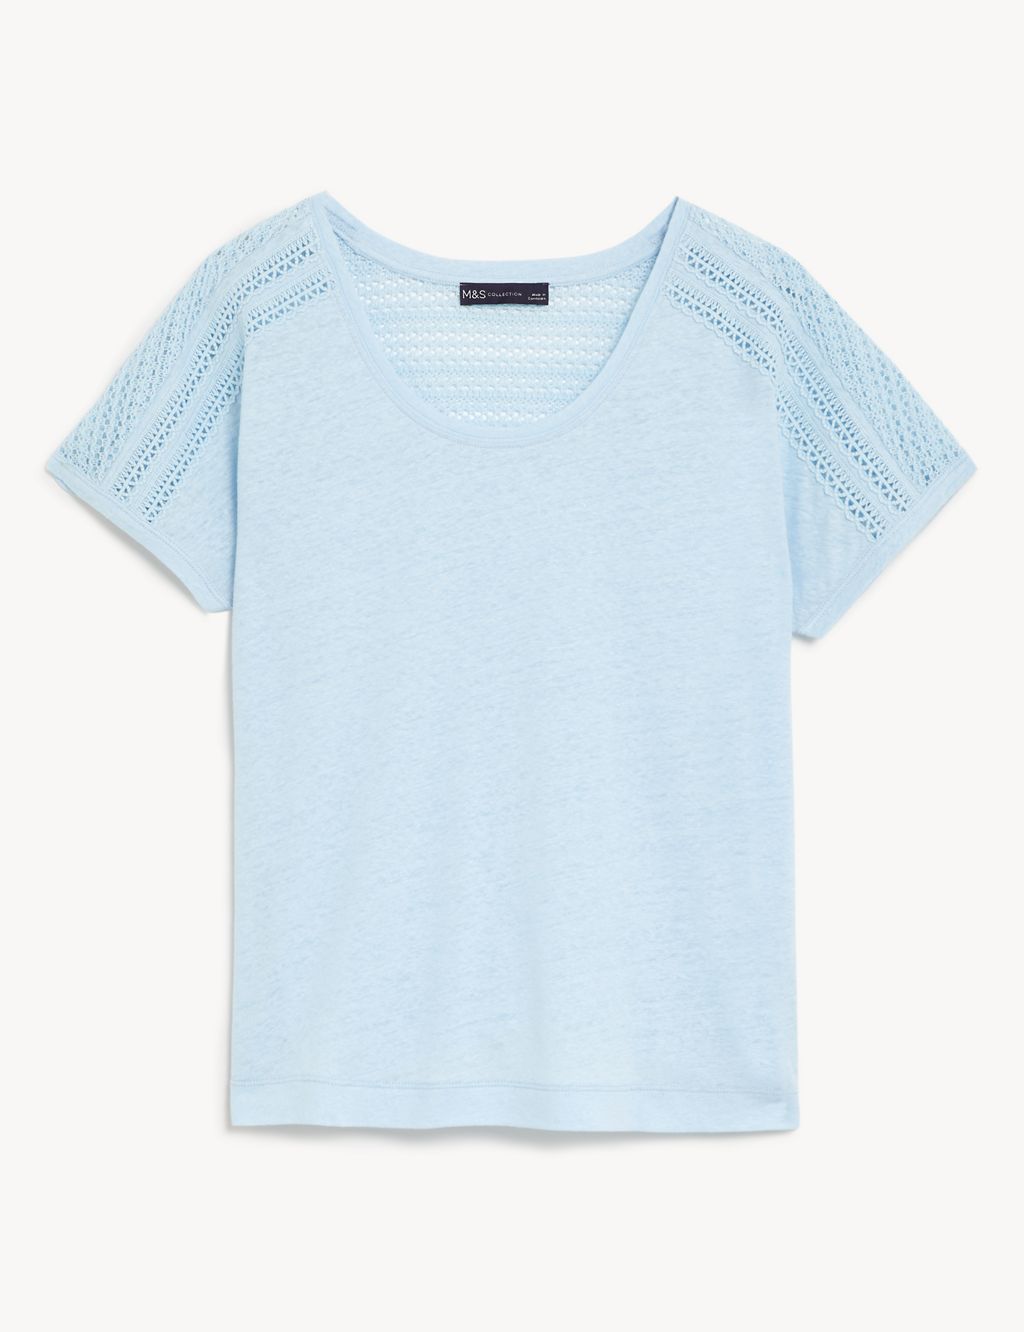 Linen Rich Broderie Top | M&S Collection | M&S